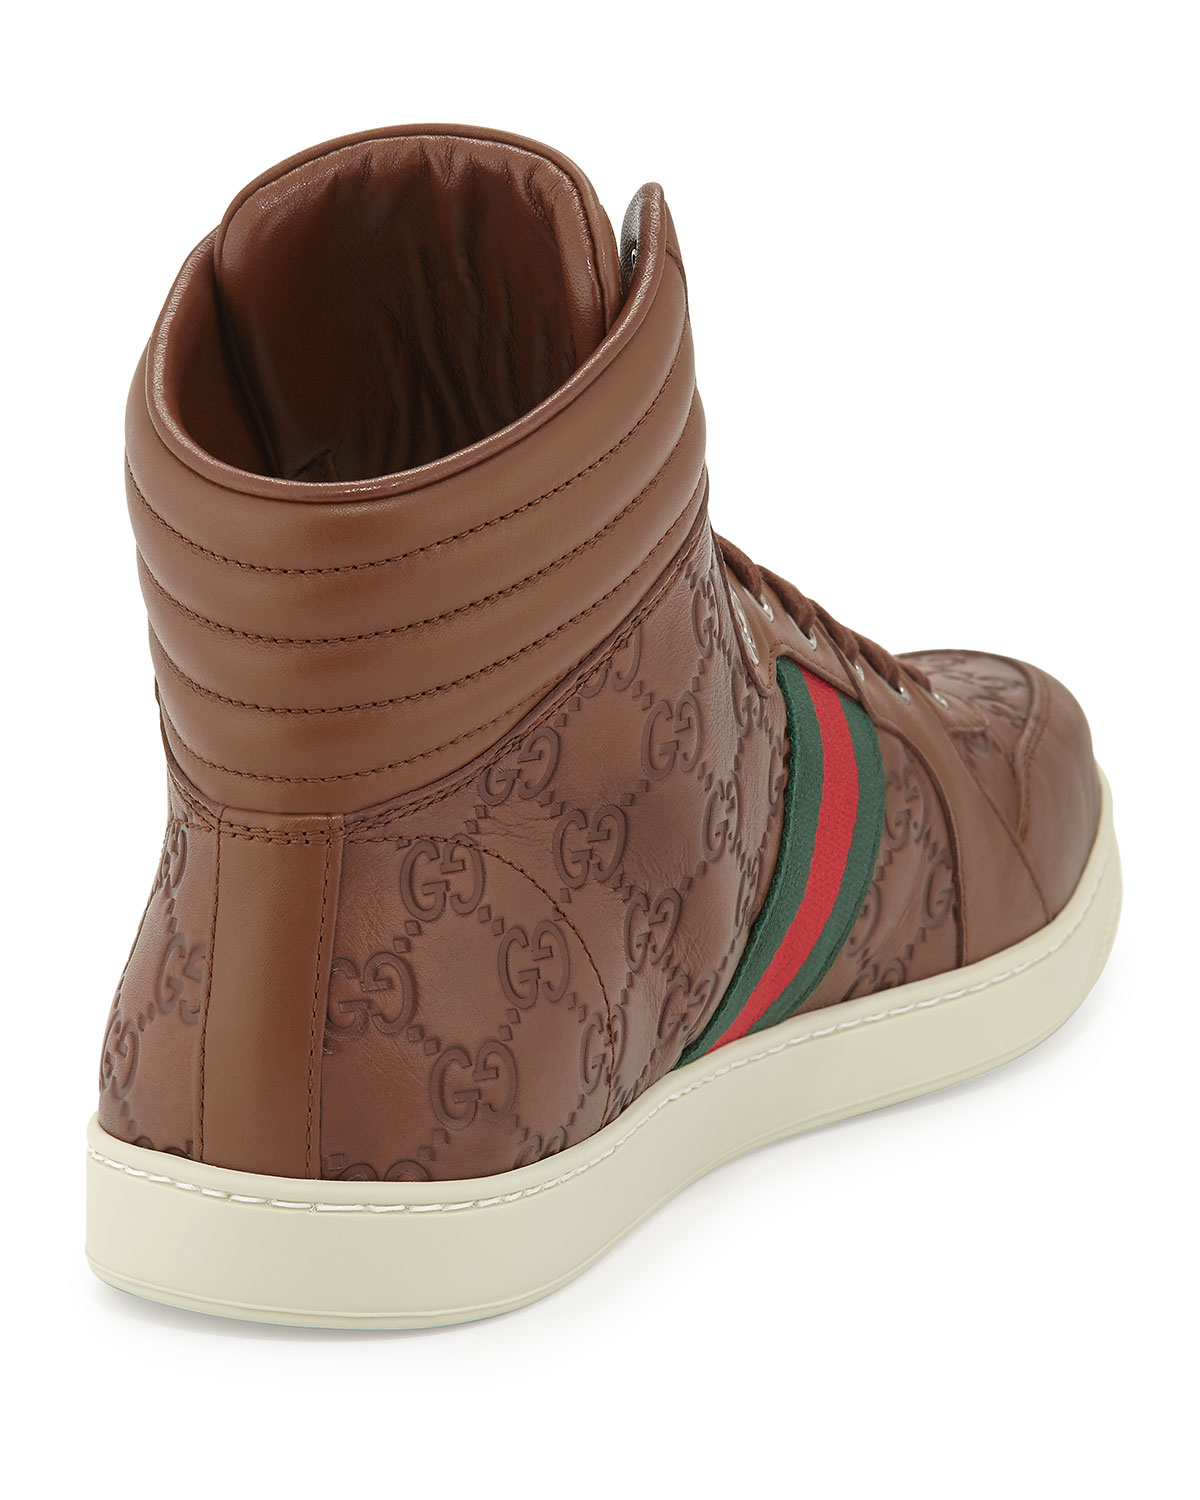 Lyst - Gucci Leather High-Top Sneakers in Brown for Men